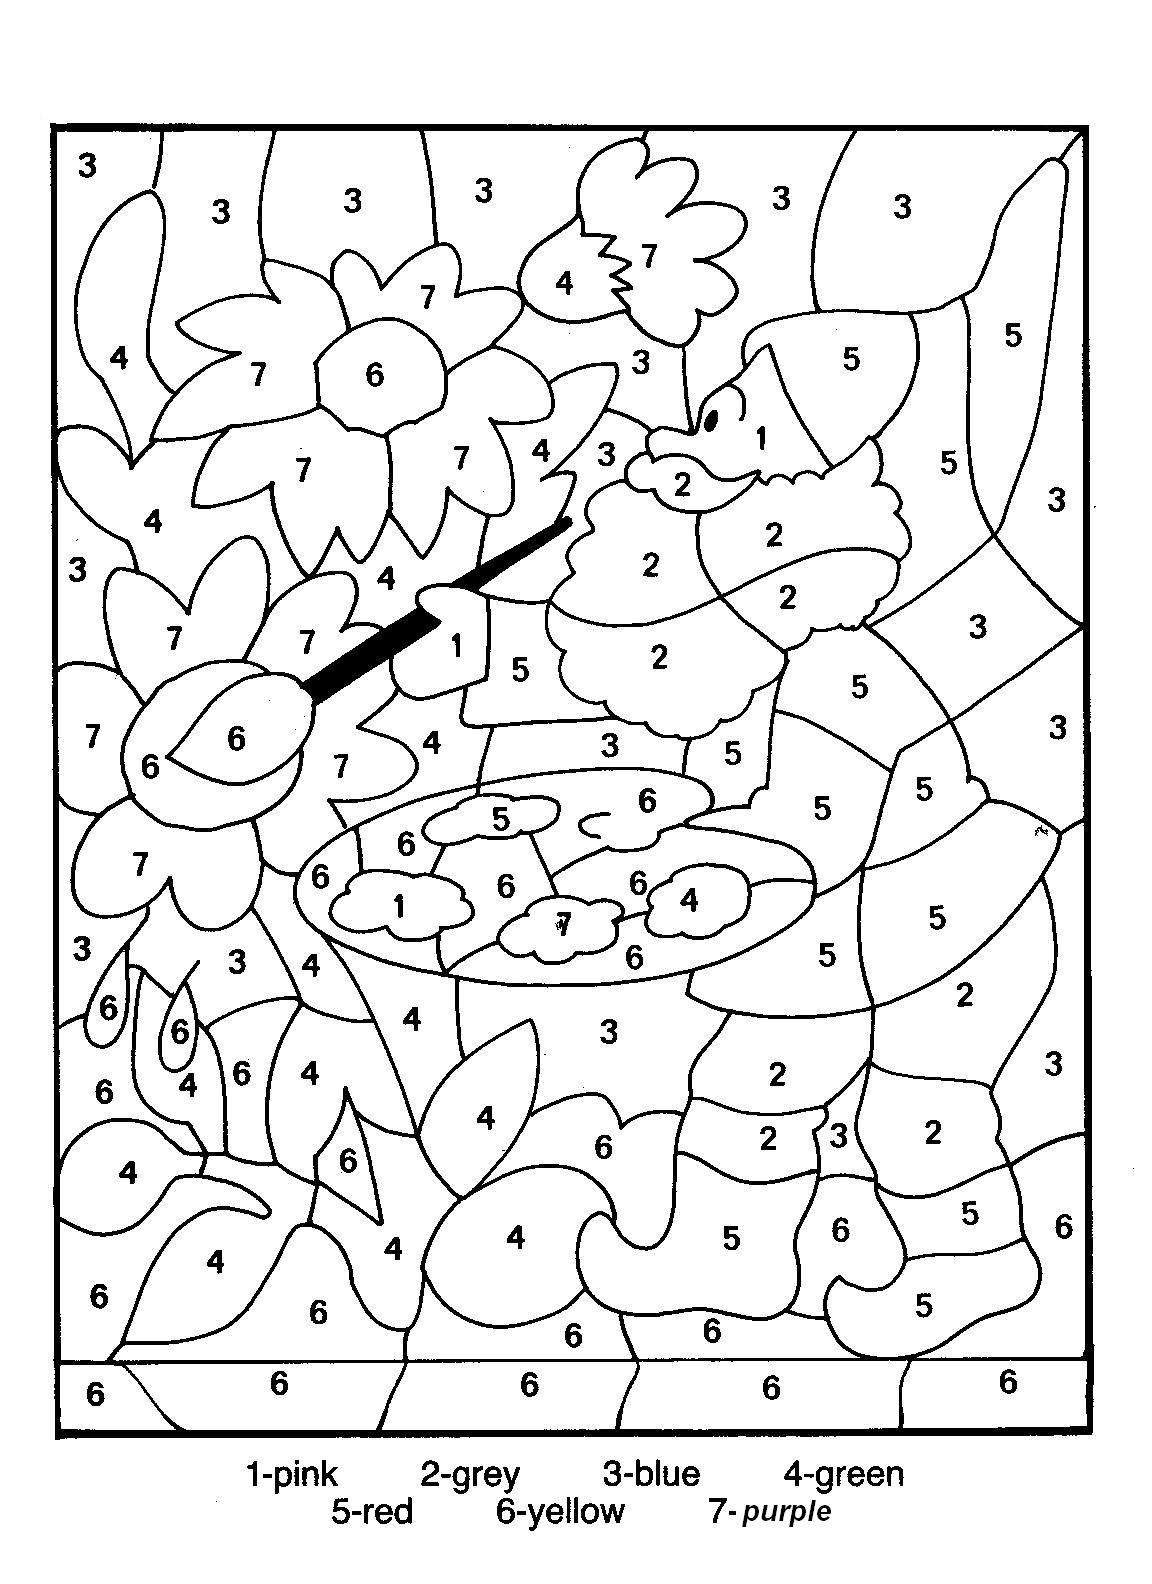 coloring-pages-with-number-codes